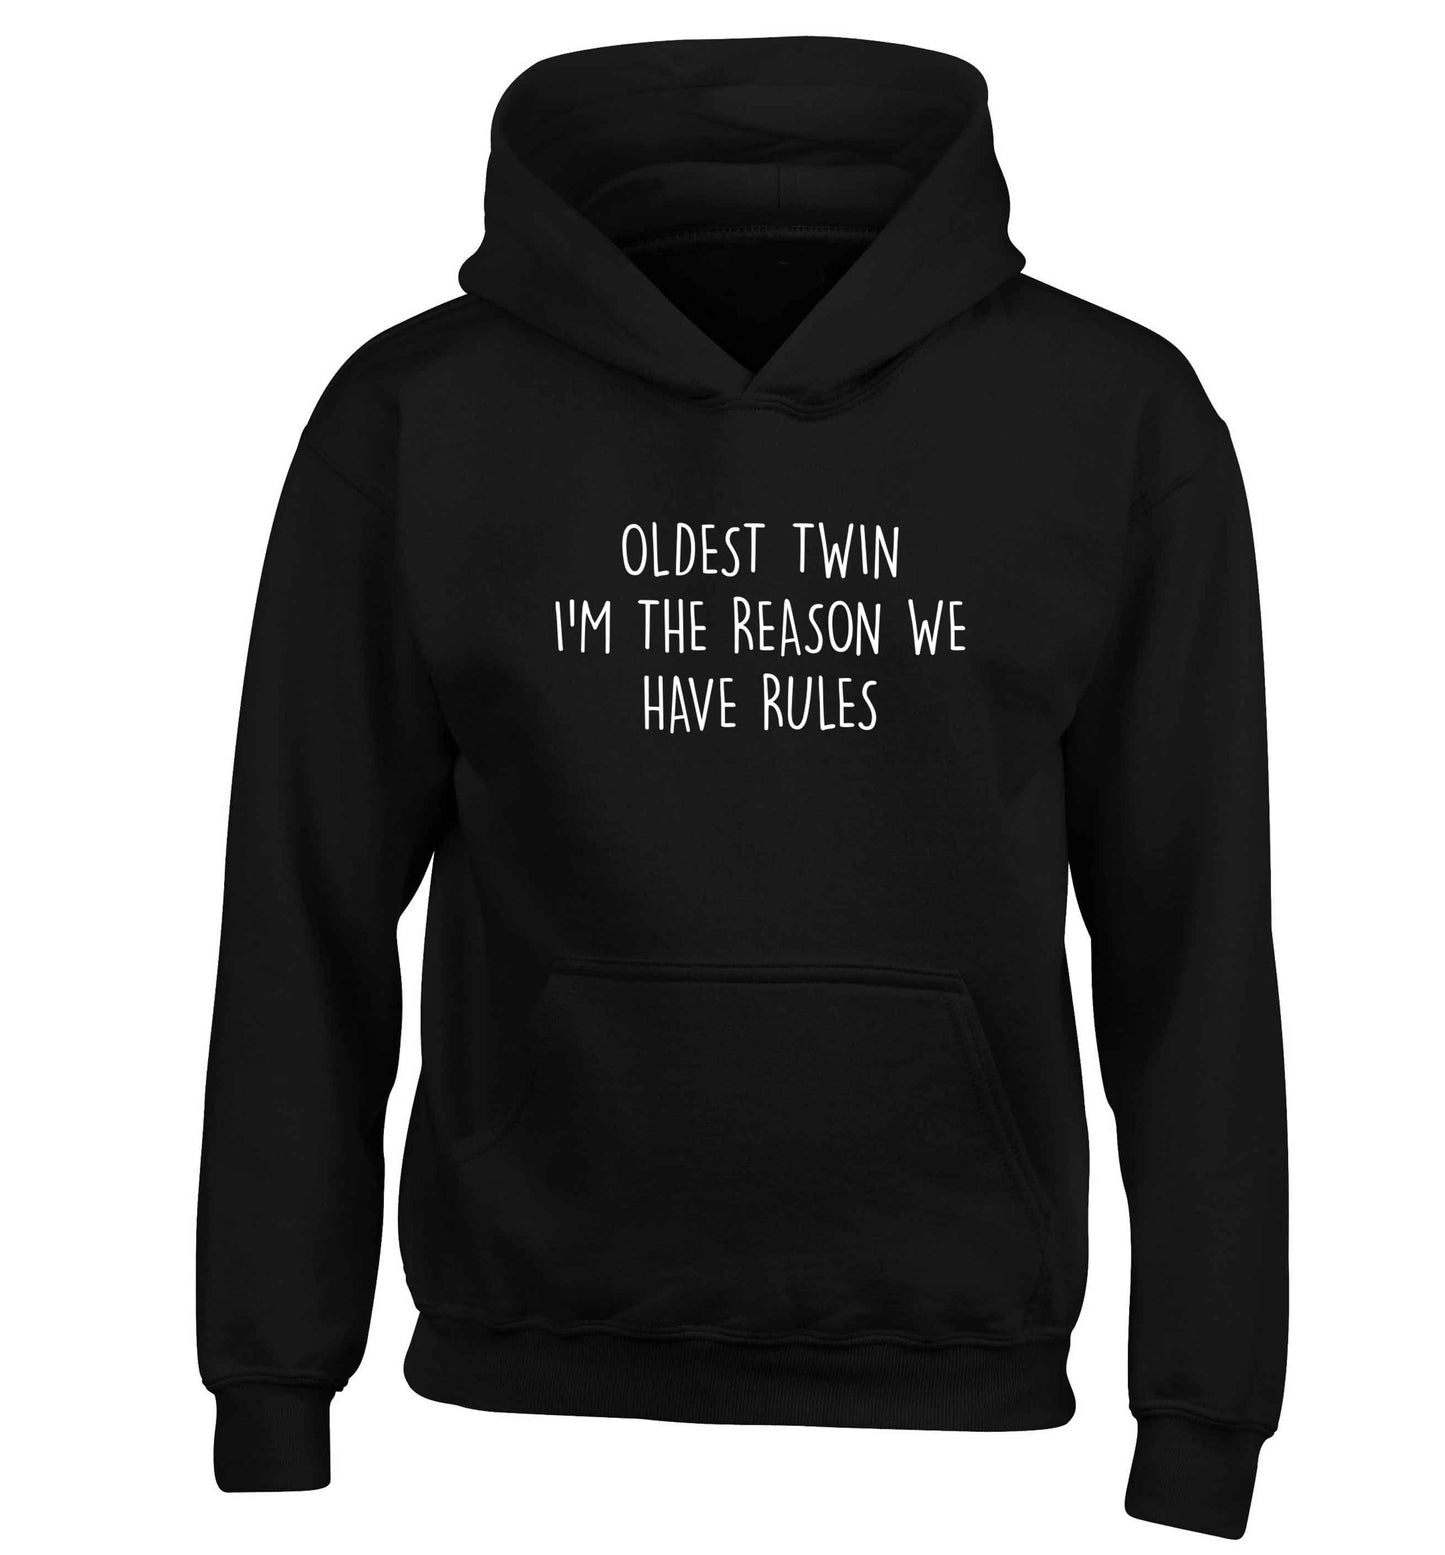 Oldest twin I'm the reason we have rules children's black hoodie 12-13 Years